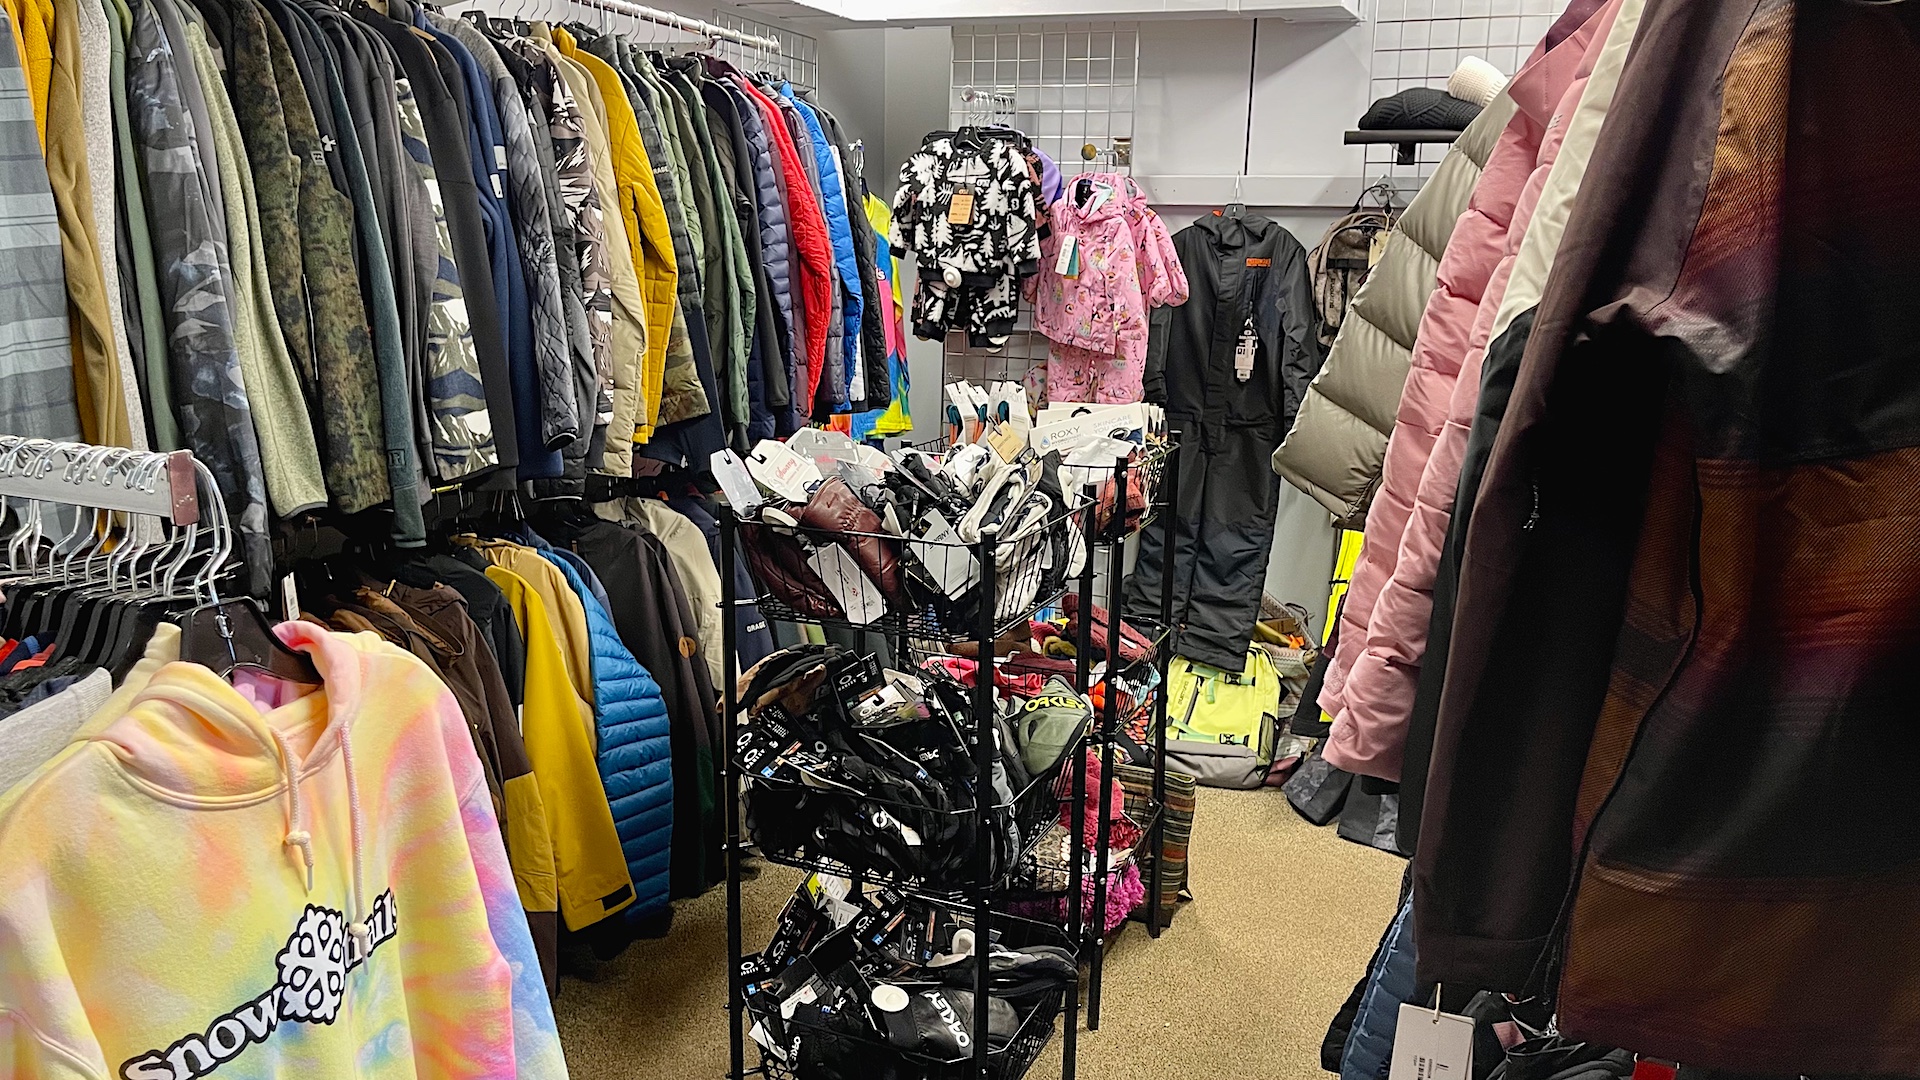 Clearance Room at Snow Trails Ski Shop in Mansfield, Ohio